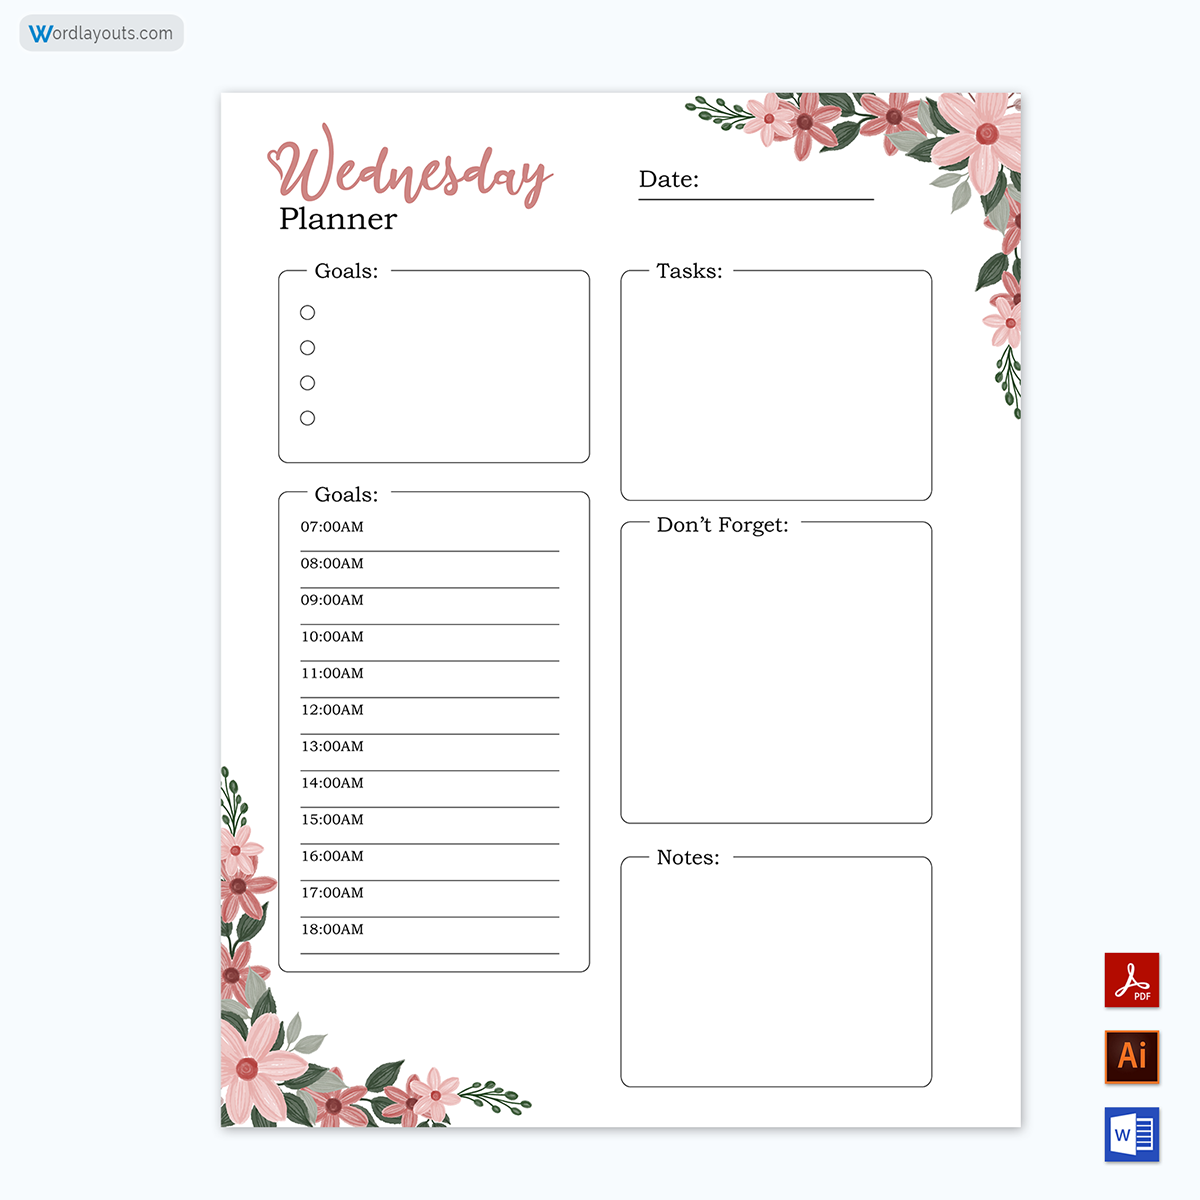 Daily-Planner-Template-8669ndnjp-06-23-p05